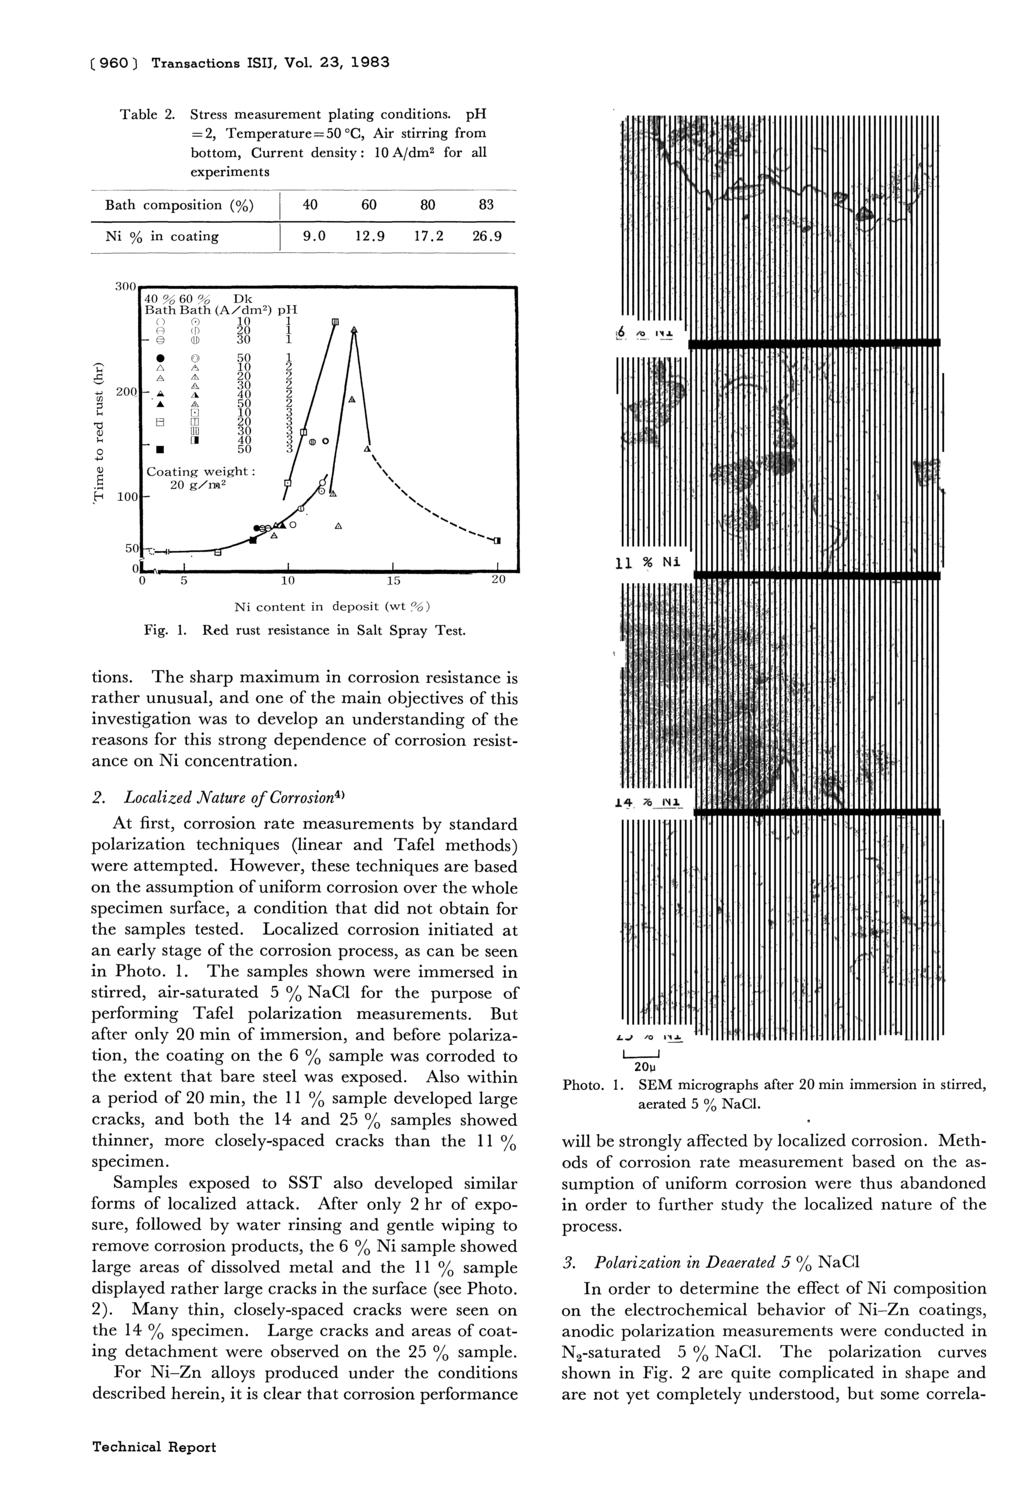 9 (960) Transactions ISIJ, Vol. 23, 1983 Table 2. Stress measurement plating conditions. ph =2, Temperature = 50 C, Air stirring from bottom, Current density : 10 A/dm2 for all experiments Fig. 1. Red rust resistance in Salt Spray Test.